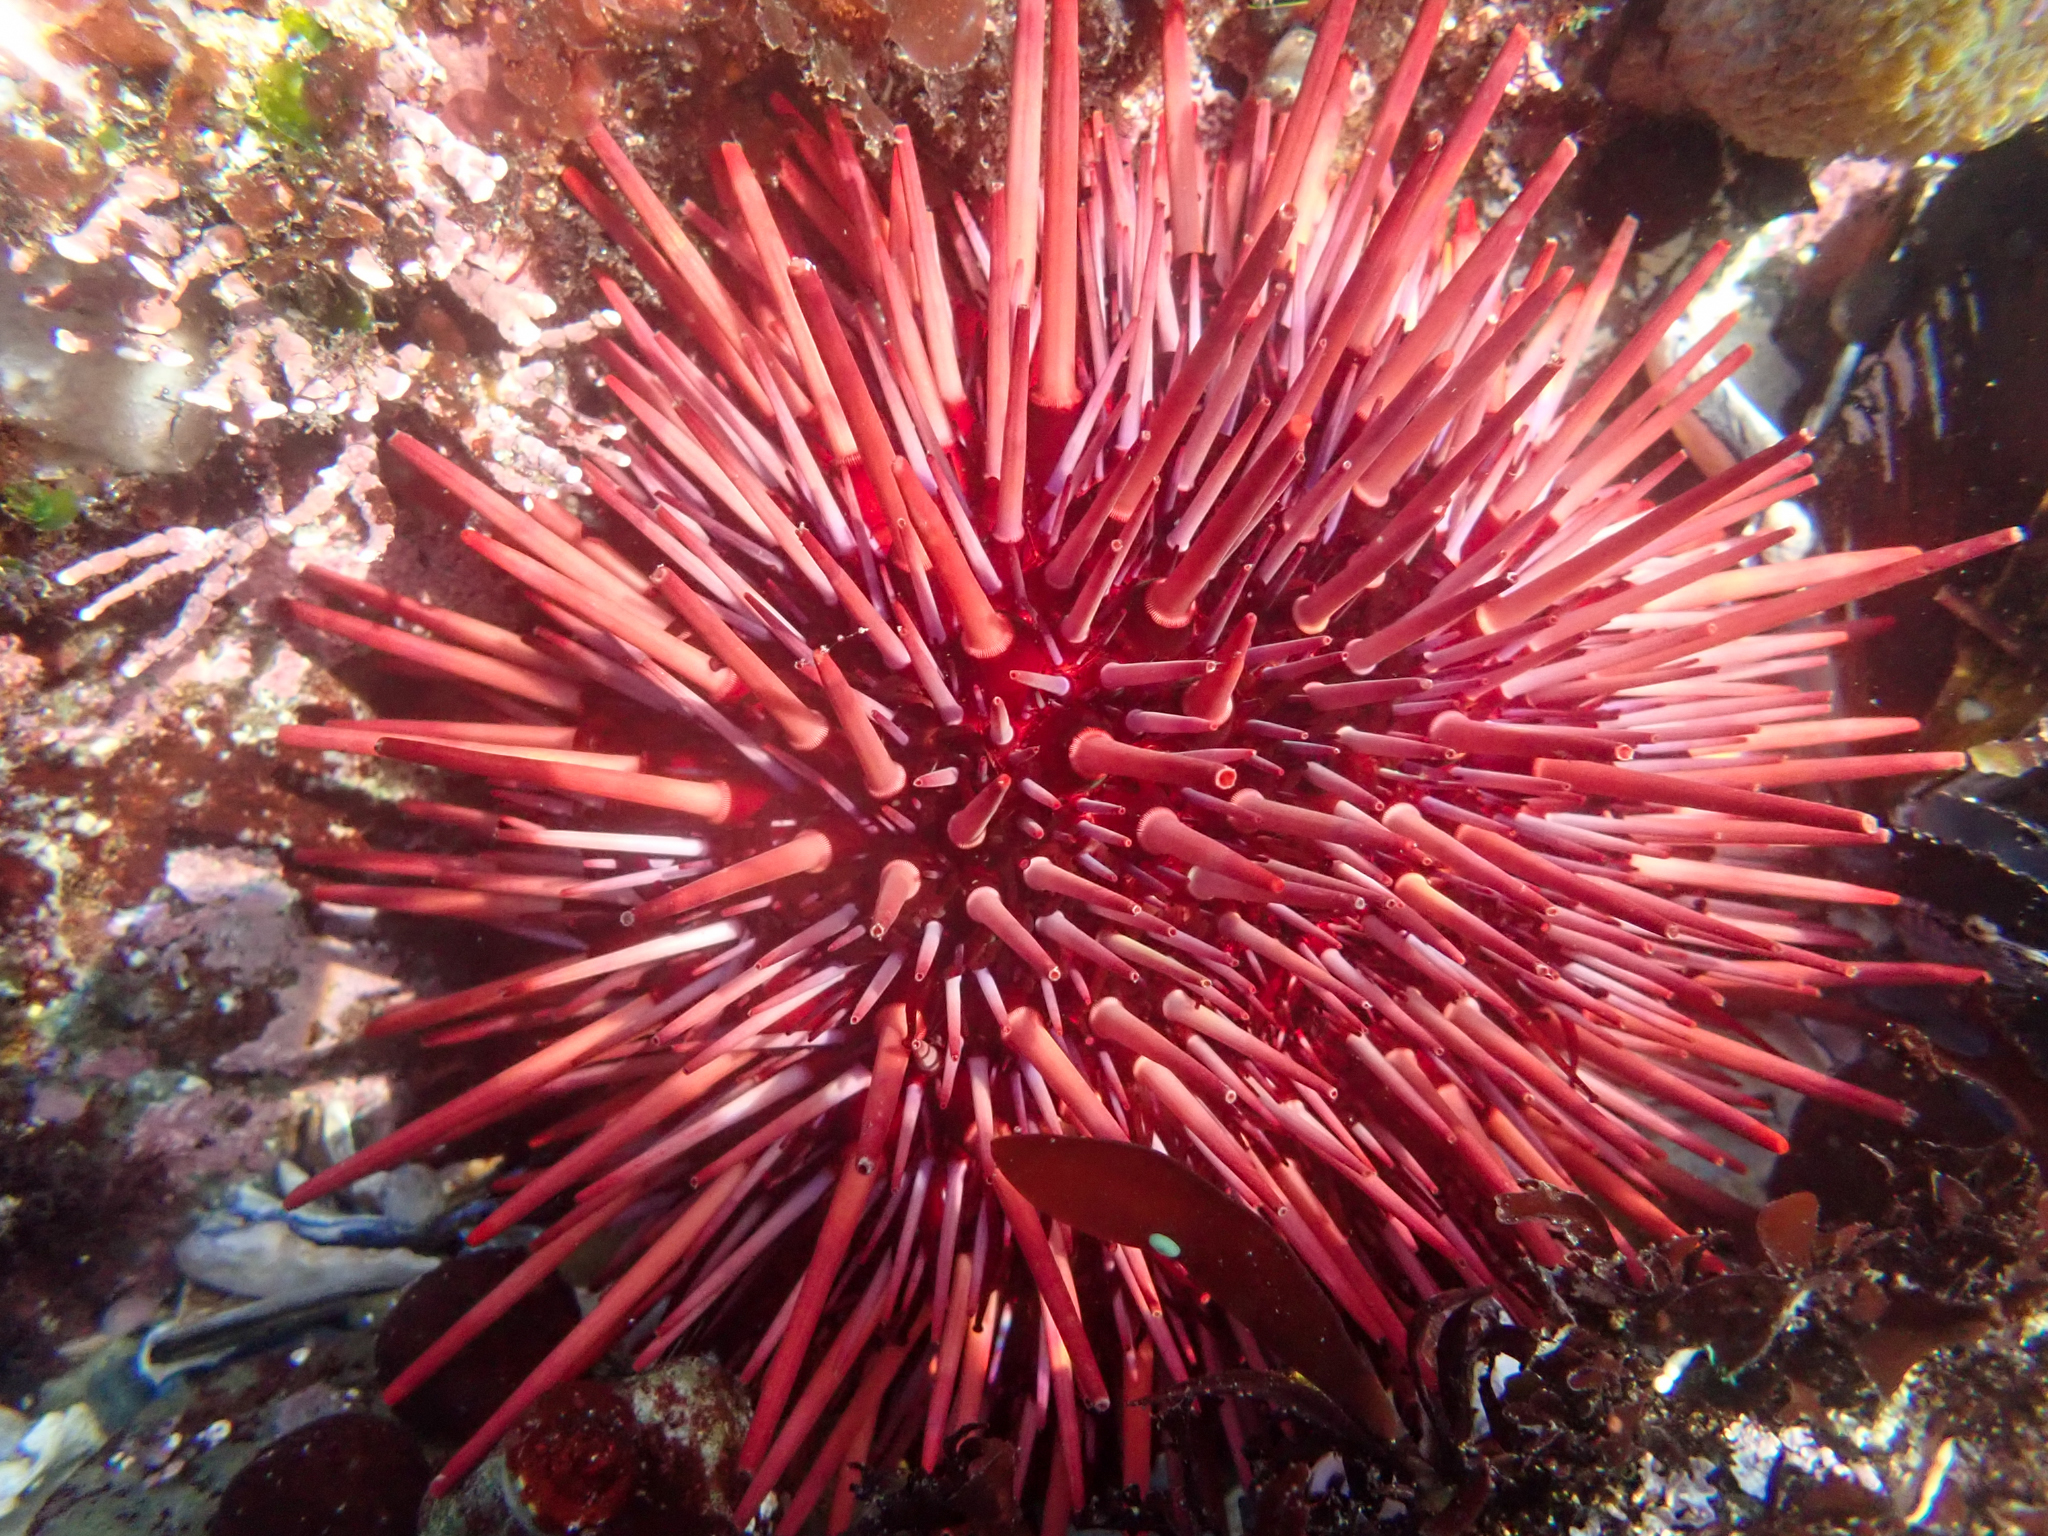 red sea urchin amongst substrate